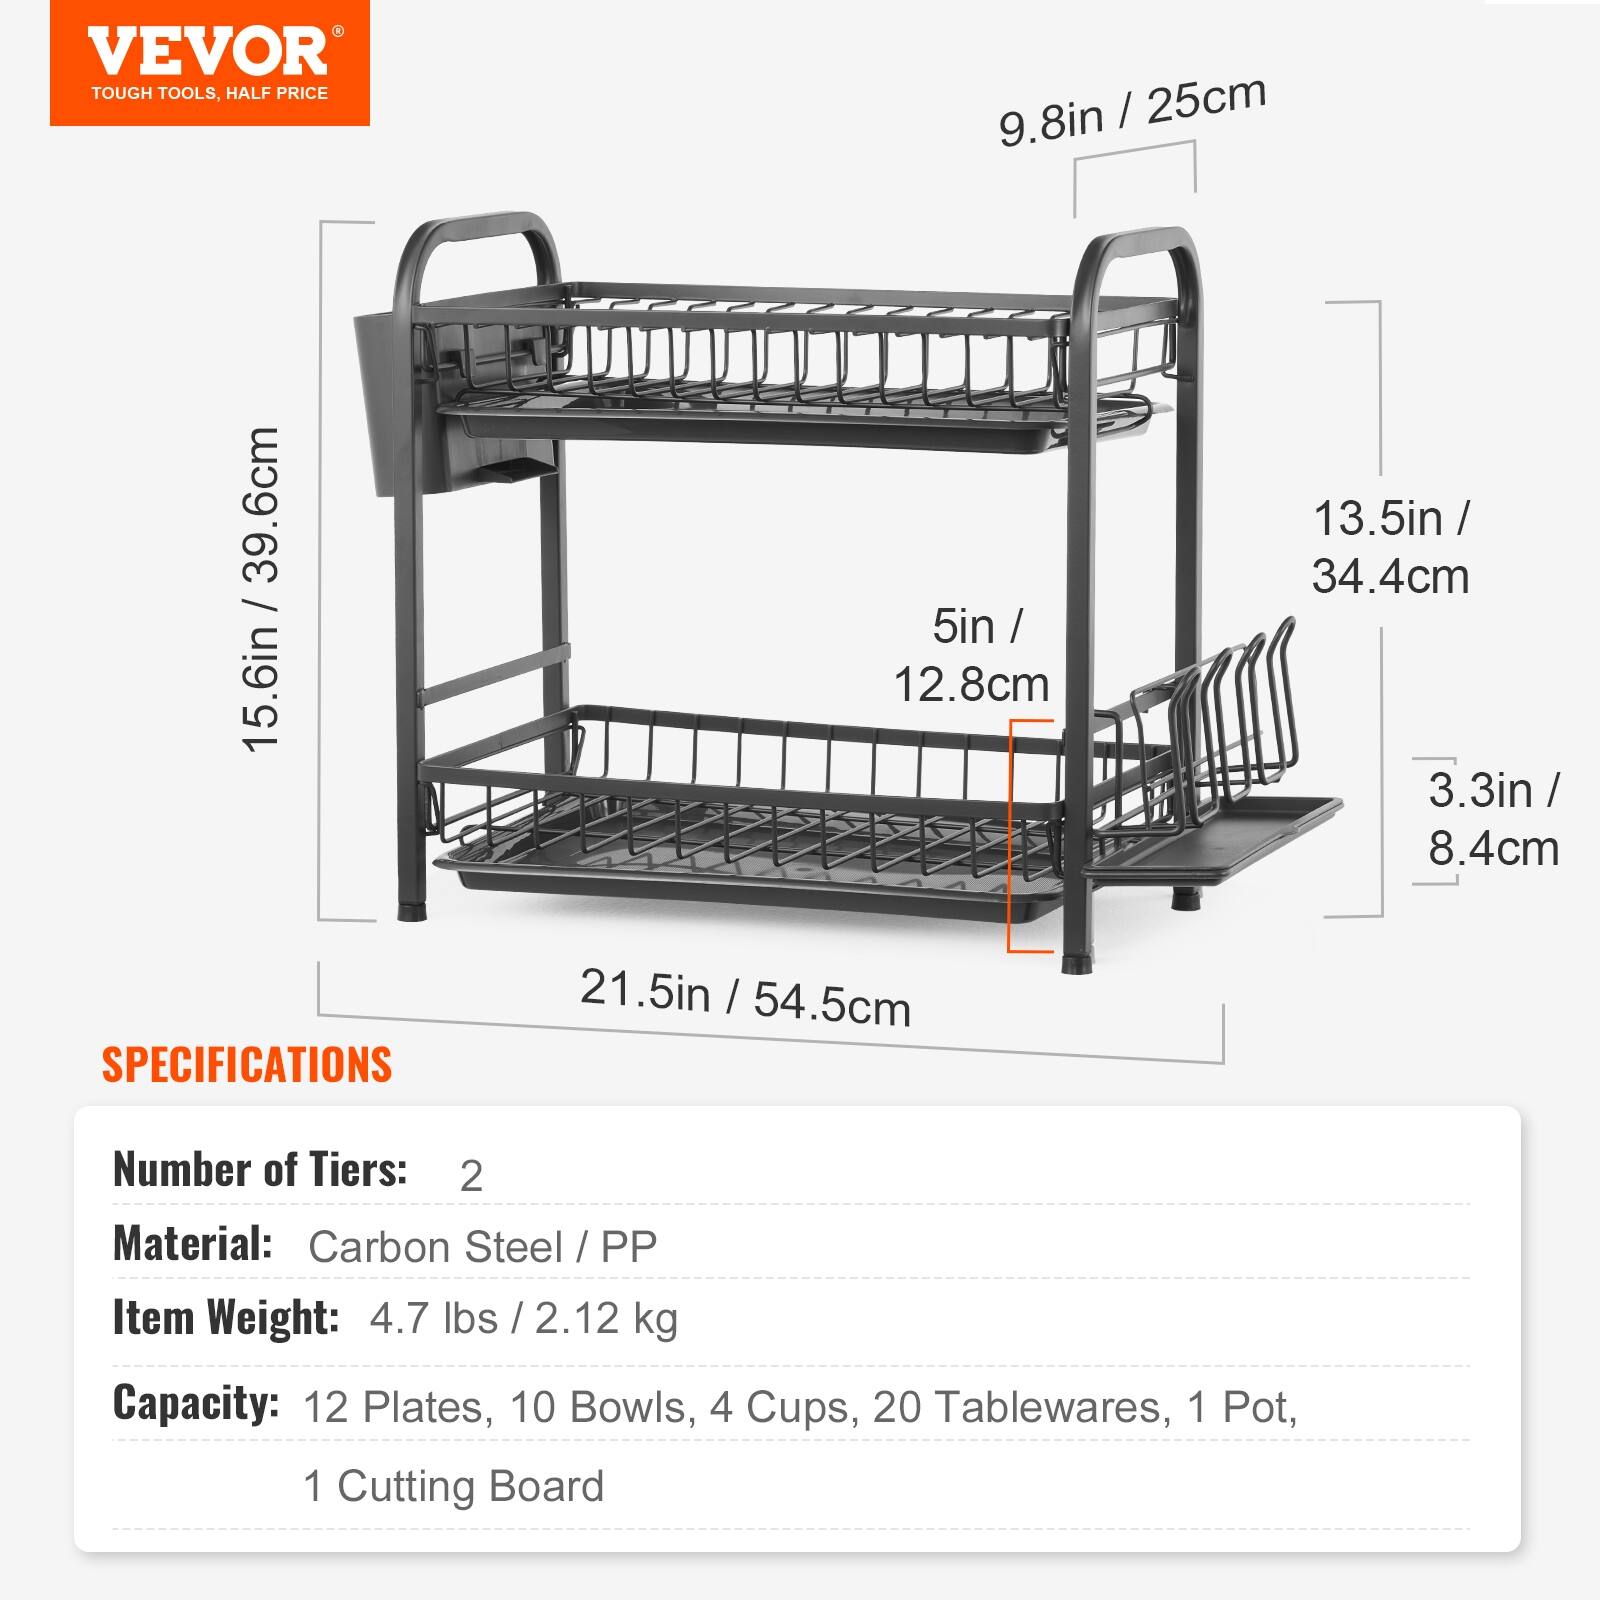 https://ak1.ostkcdn.com/images/products/is/images/direct/41d056032bc2a37851a0822ddce2d194e1fdf153/VEVOR-2-Tier-Dish-Drying-Rack-Large-Capacity-Drainer-Carbon-Steel-Kitchen-Utensil-Holder.jpg